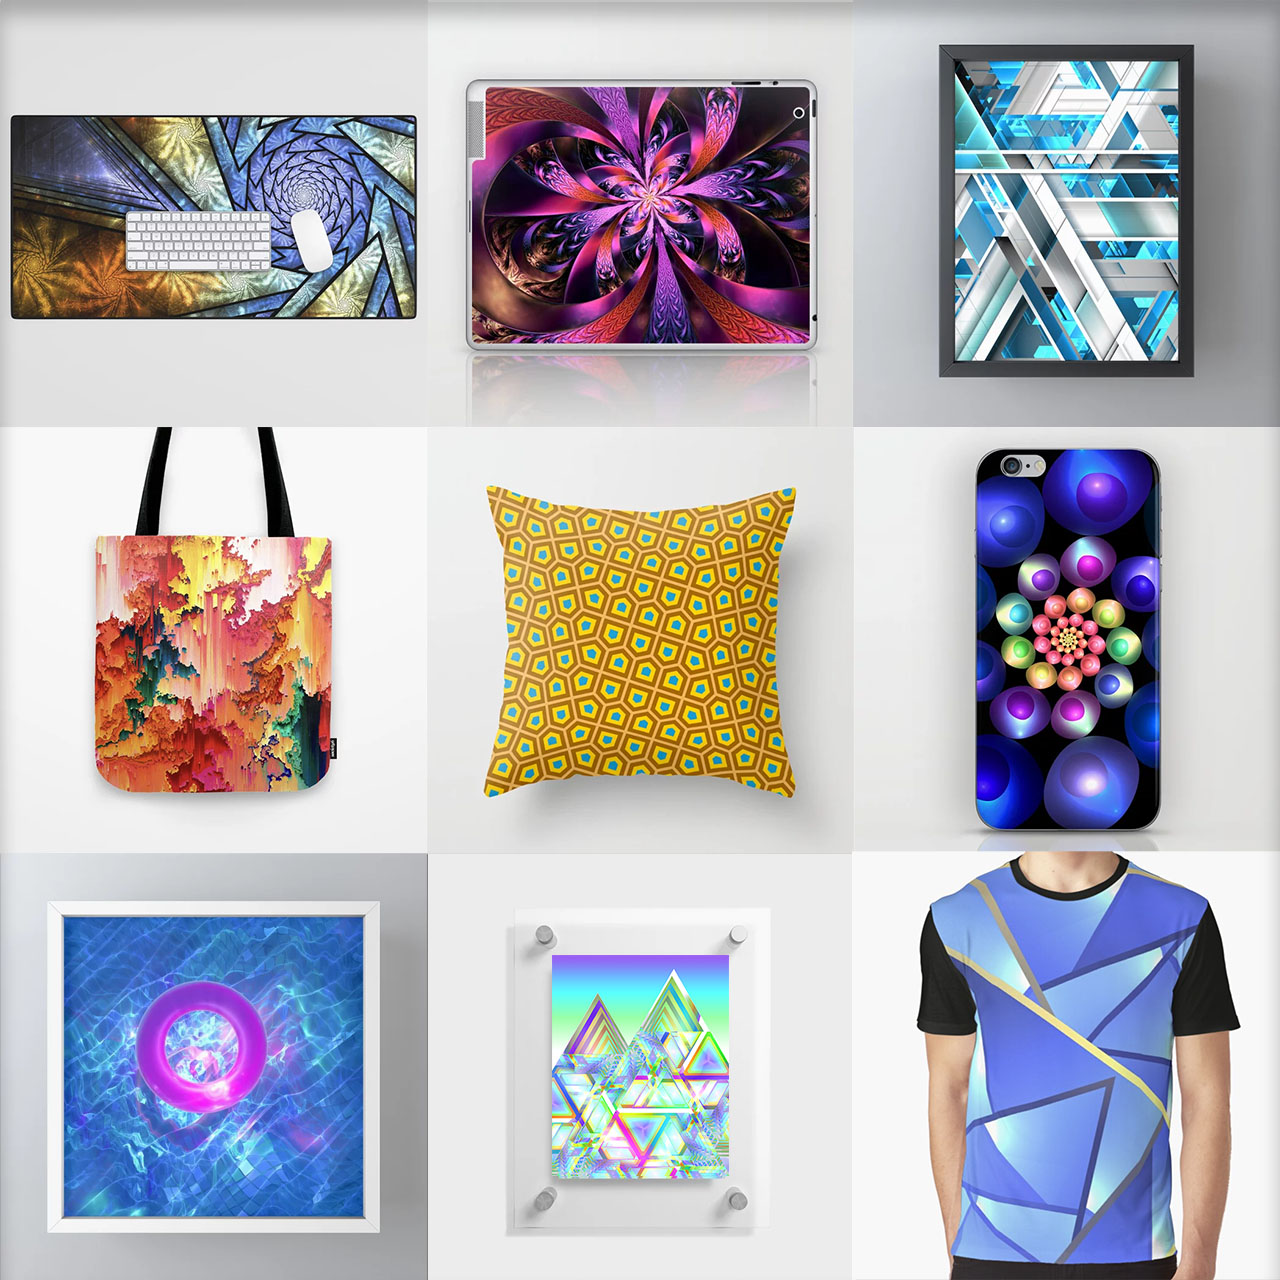 Prints and products by Synthetick